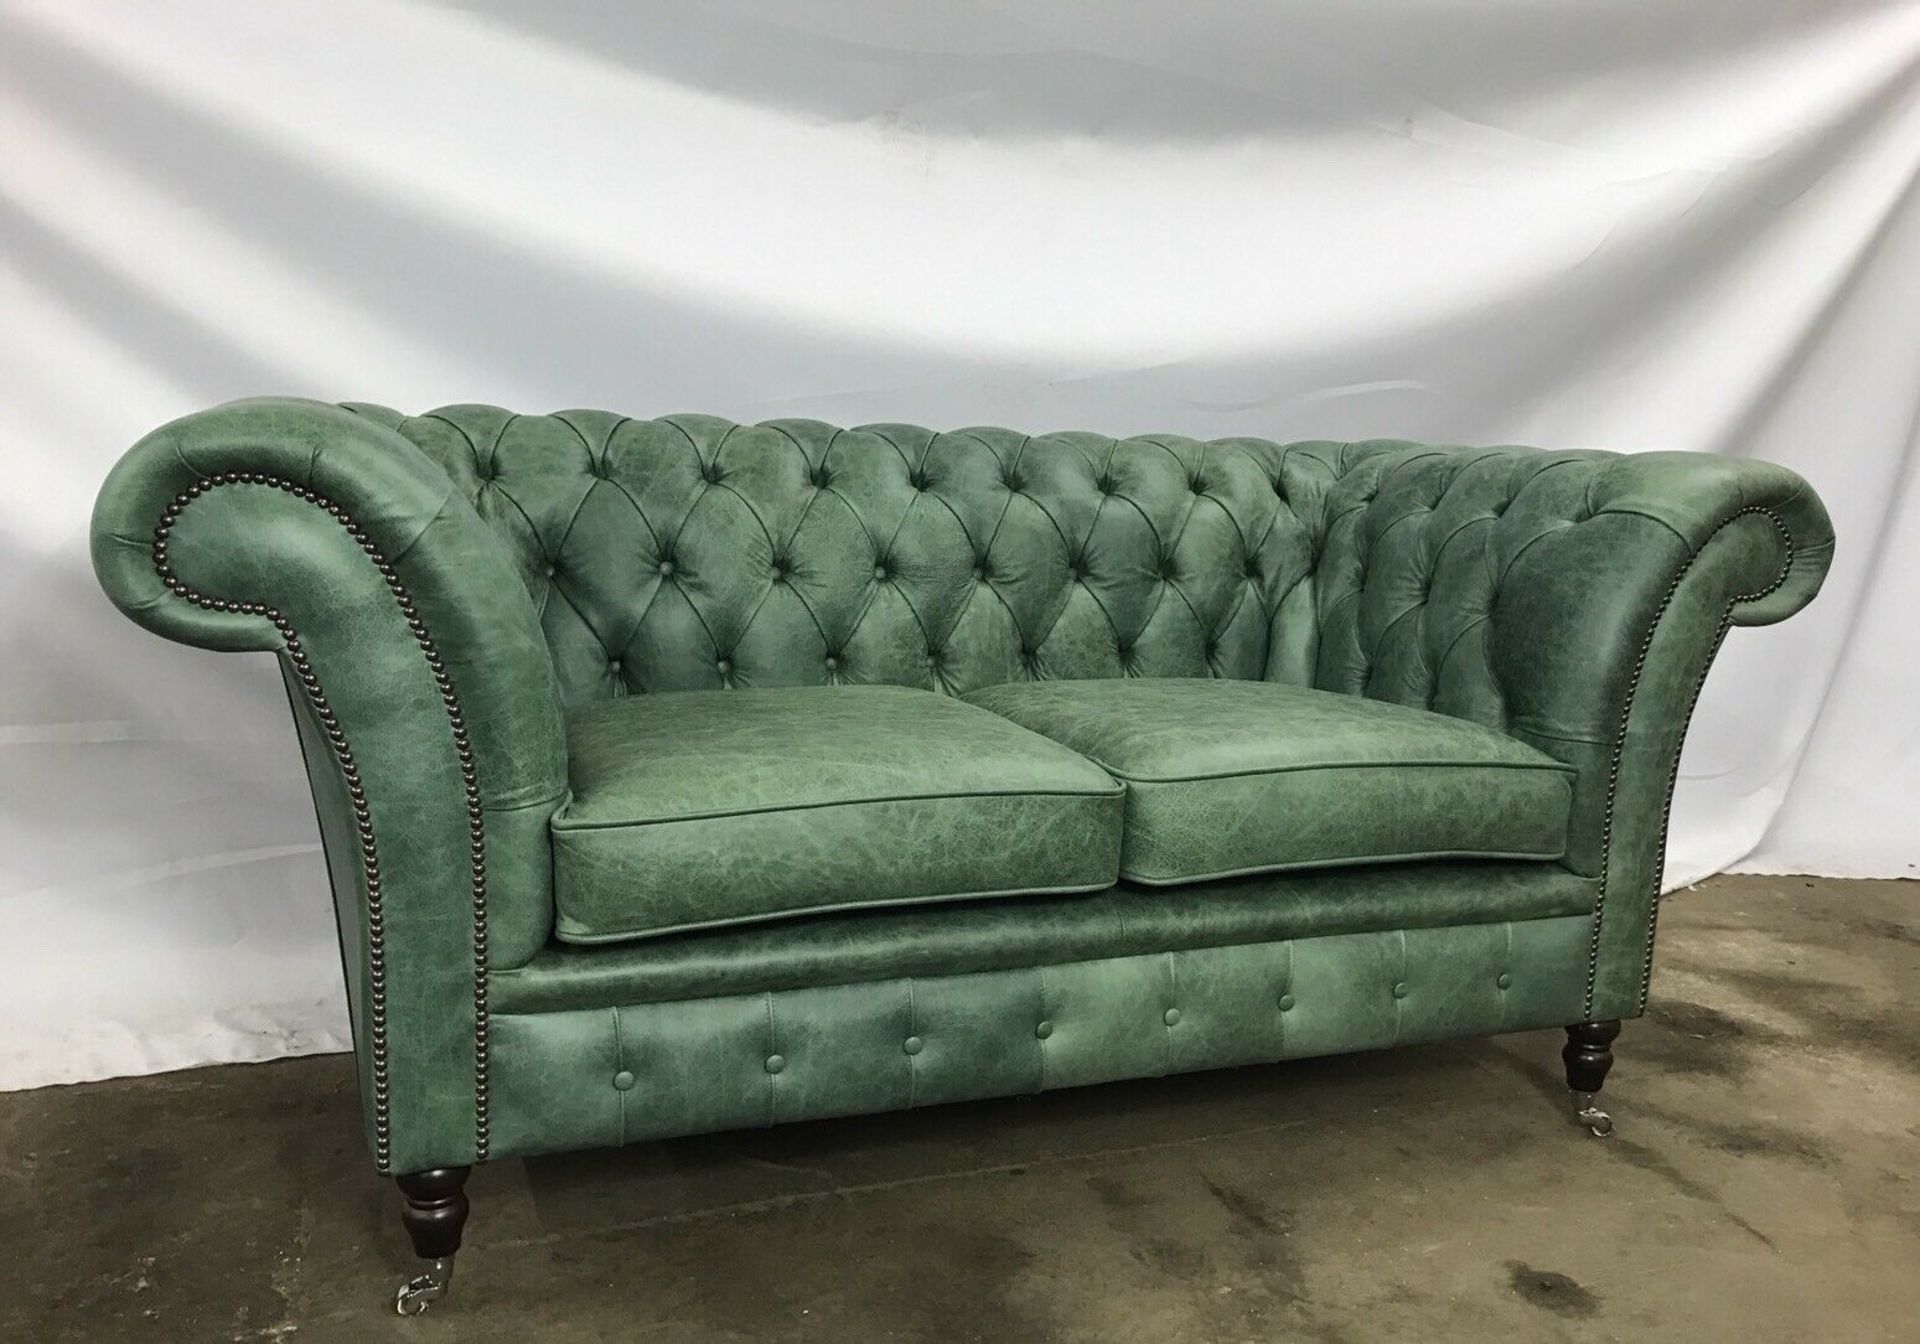 Paris 2 Seater Chesterfield In Selvagio Verde Distressed Leather Beautifully Creative And - Image 2 of 3